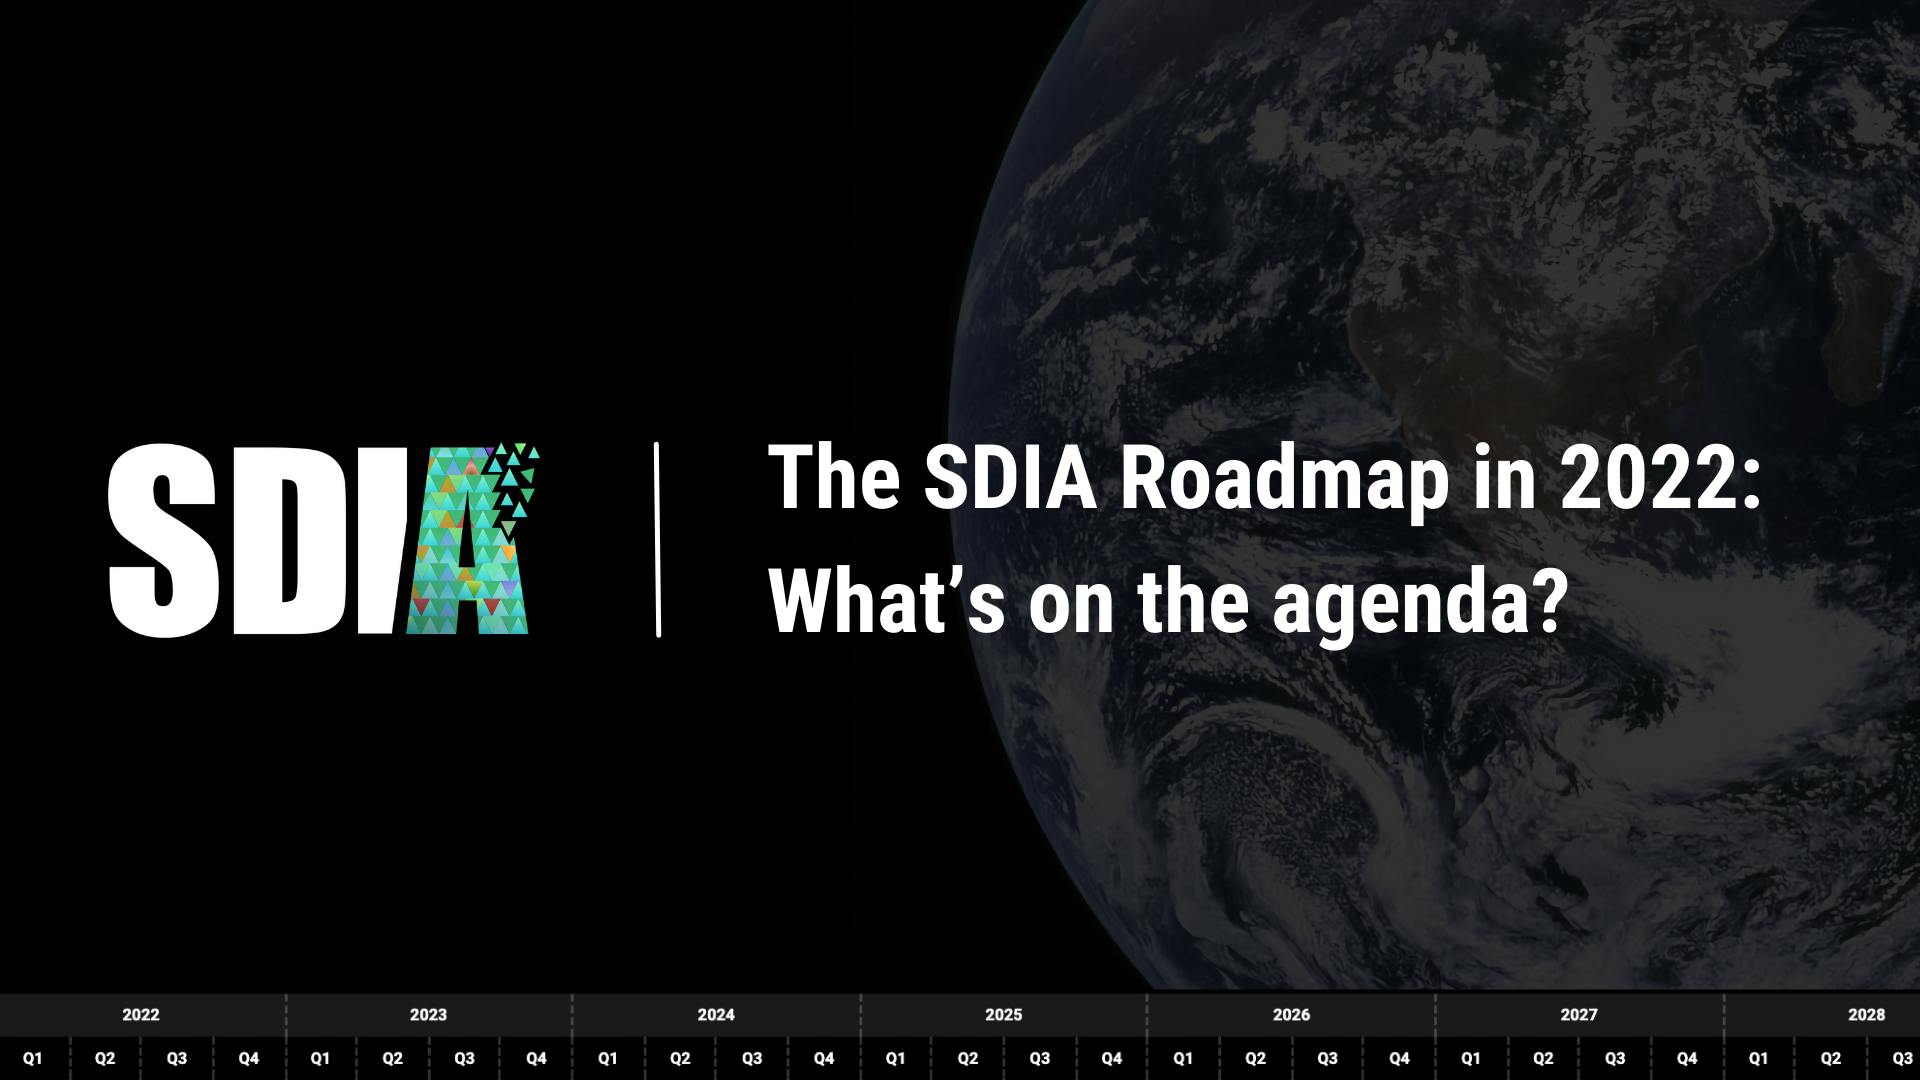 The SDIA Roadmap in 2022: What’s on the agenda?